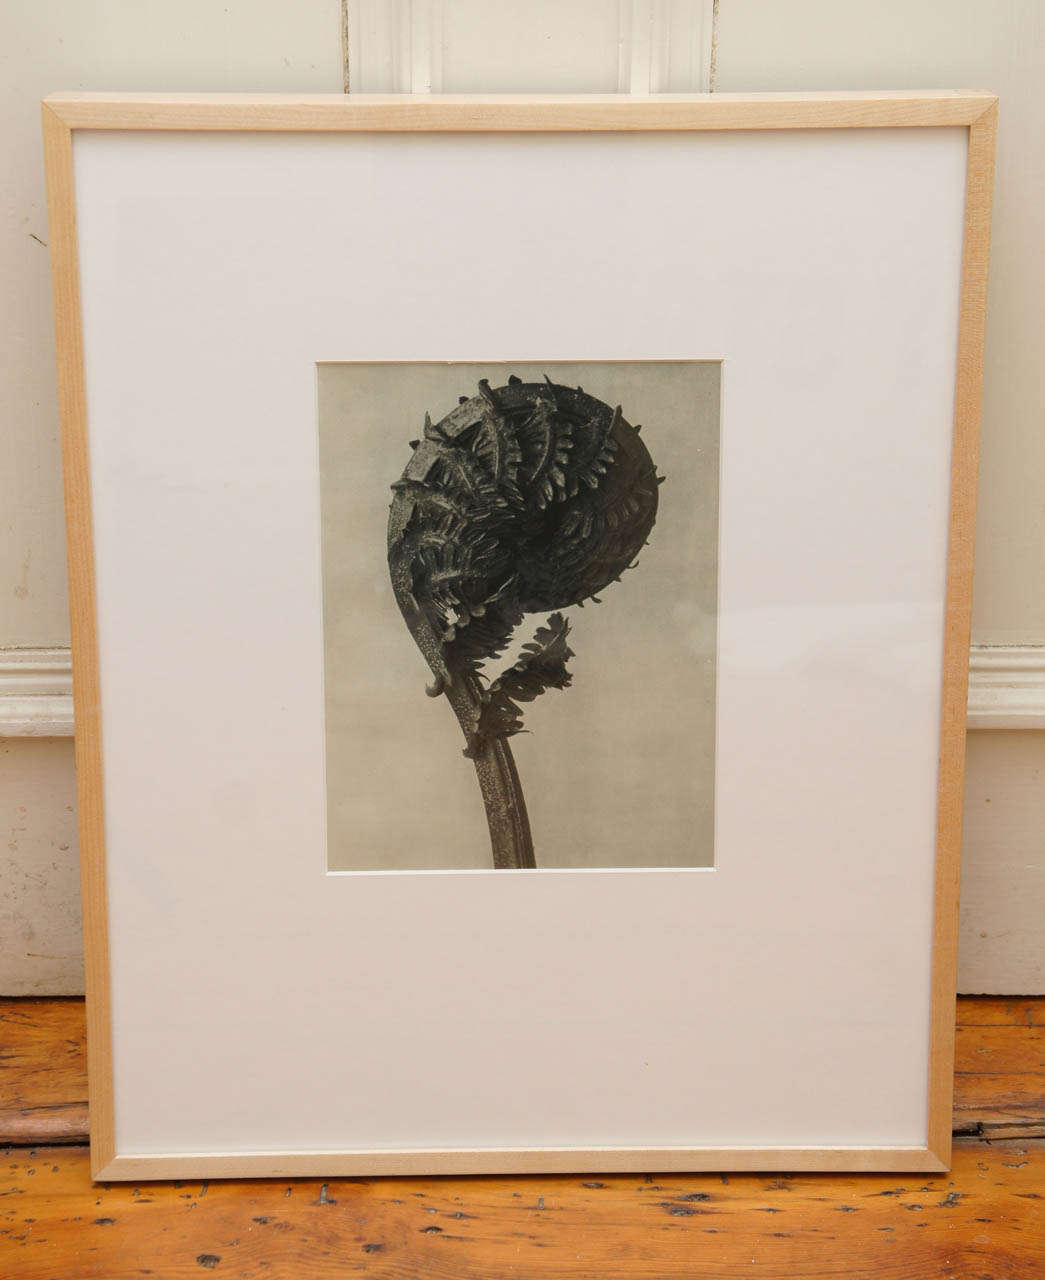 After Karl Blossfeldt (1865-1932) original botanical photogravure of a fern. From Urformen Der
Kunst, 1929 on woven paper with old binding at left margin edge and label from Atlantic
Gallery, Ltd., NY. Blond wooden frame. One of two available.